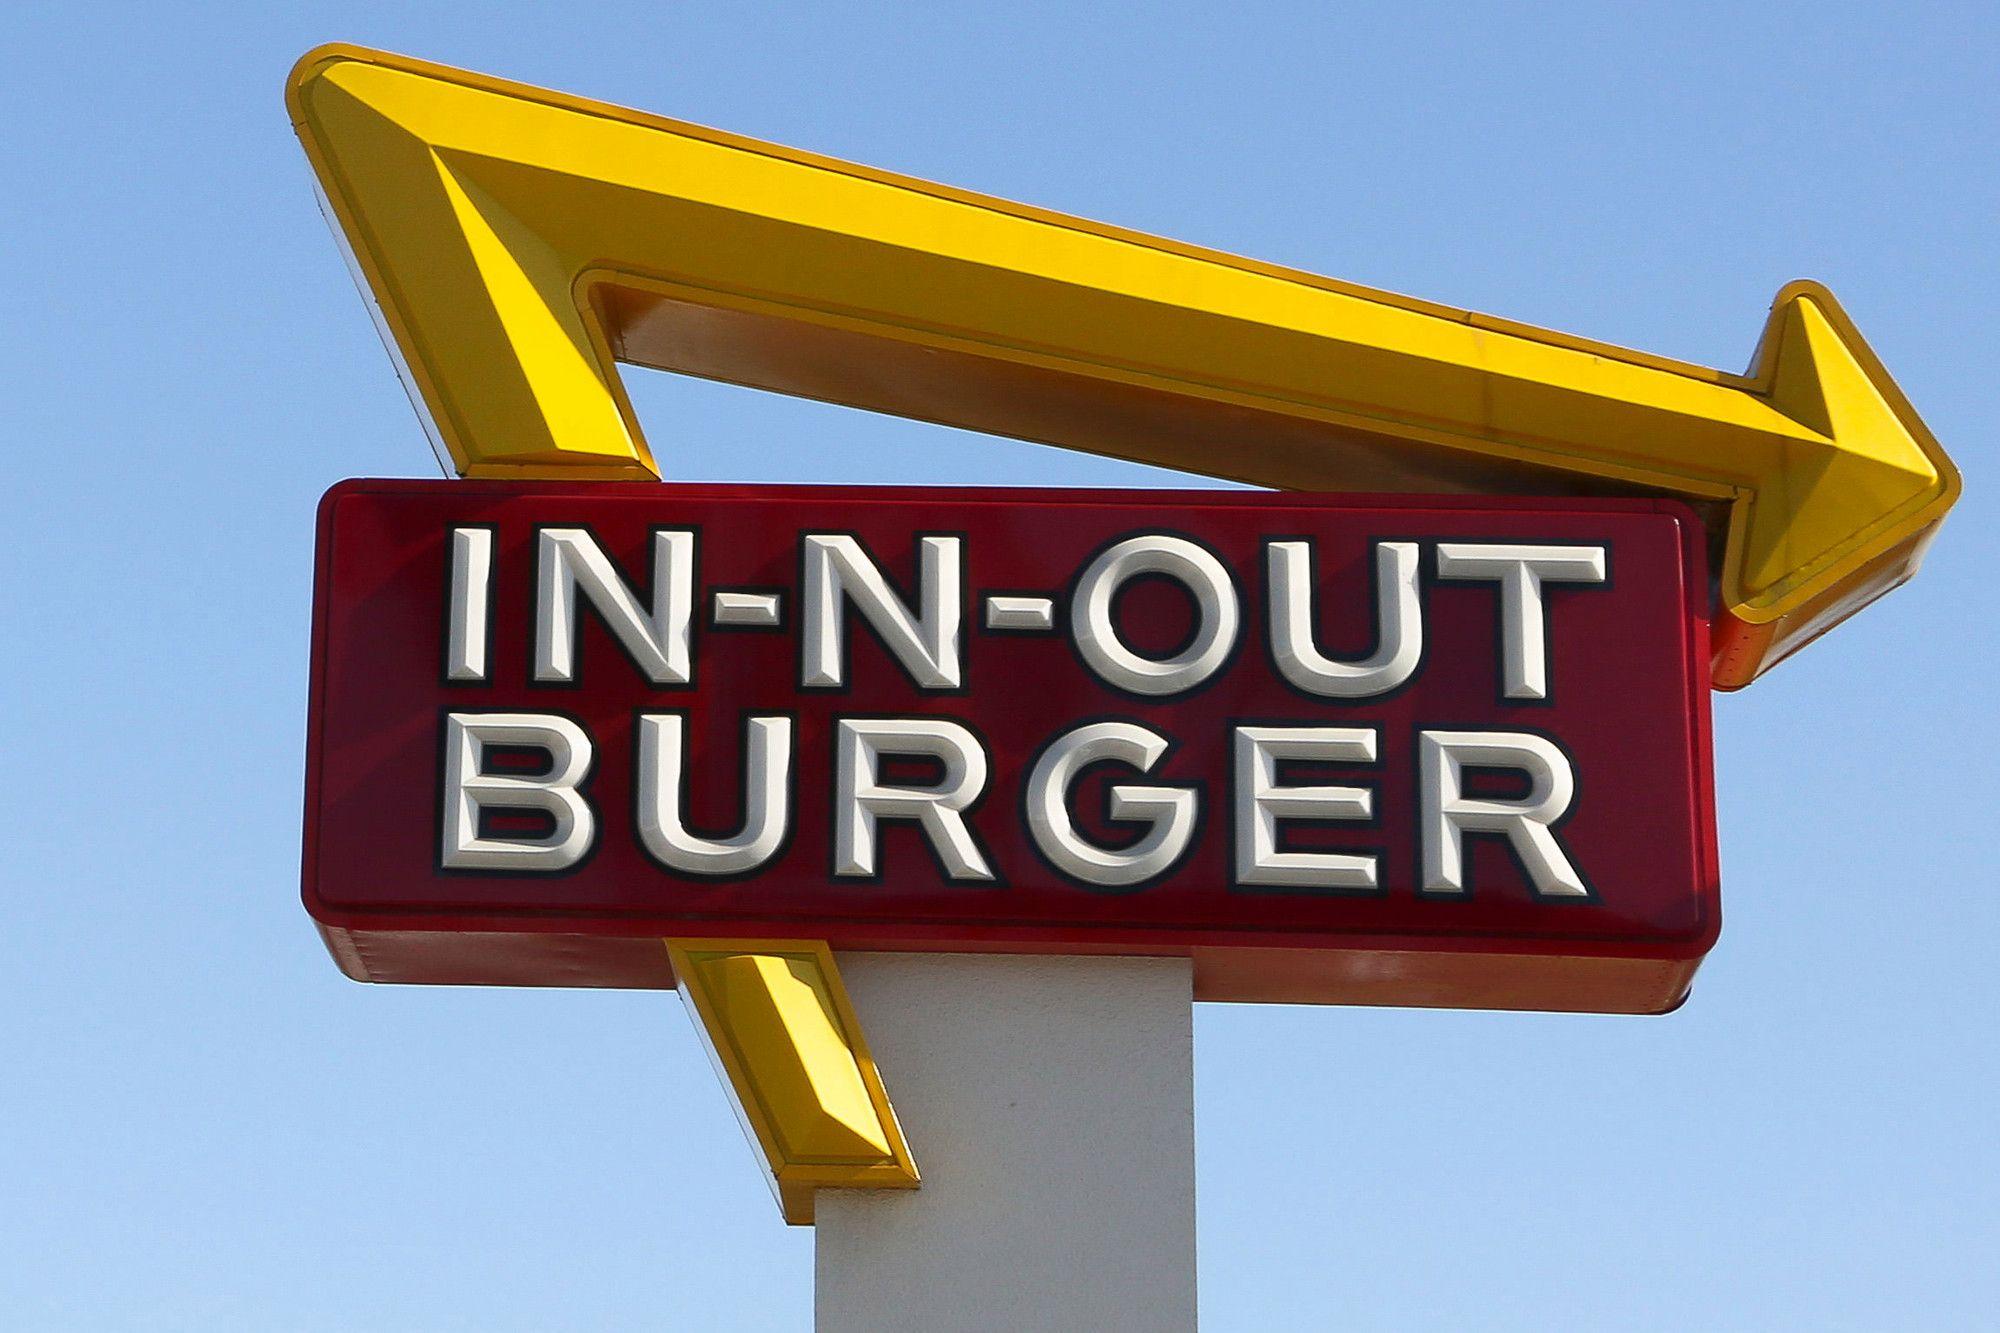 In-N-Out Burger Logo - In-N-Out adds first new item to menu in more than a decade